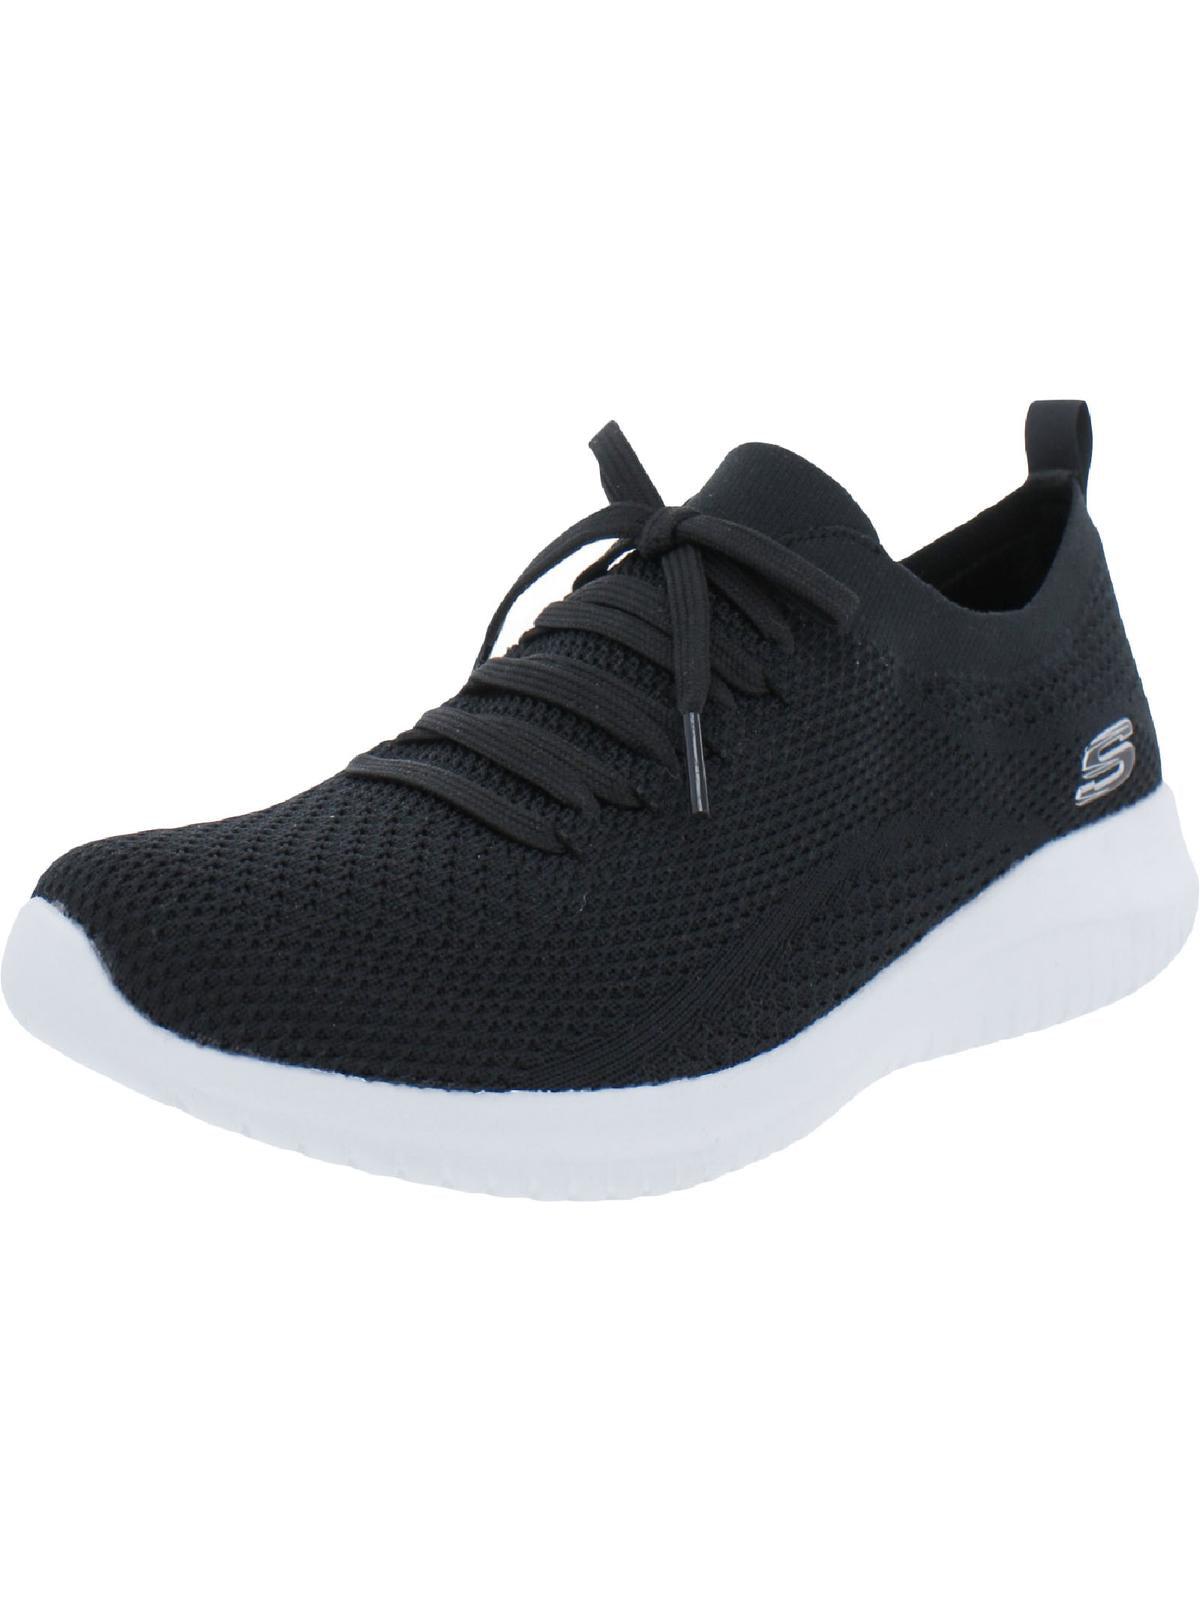 Skechers Ultra Flex Statements Running Performance Athletic Shoes in Black  | Lyst